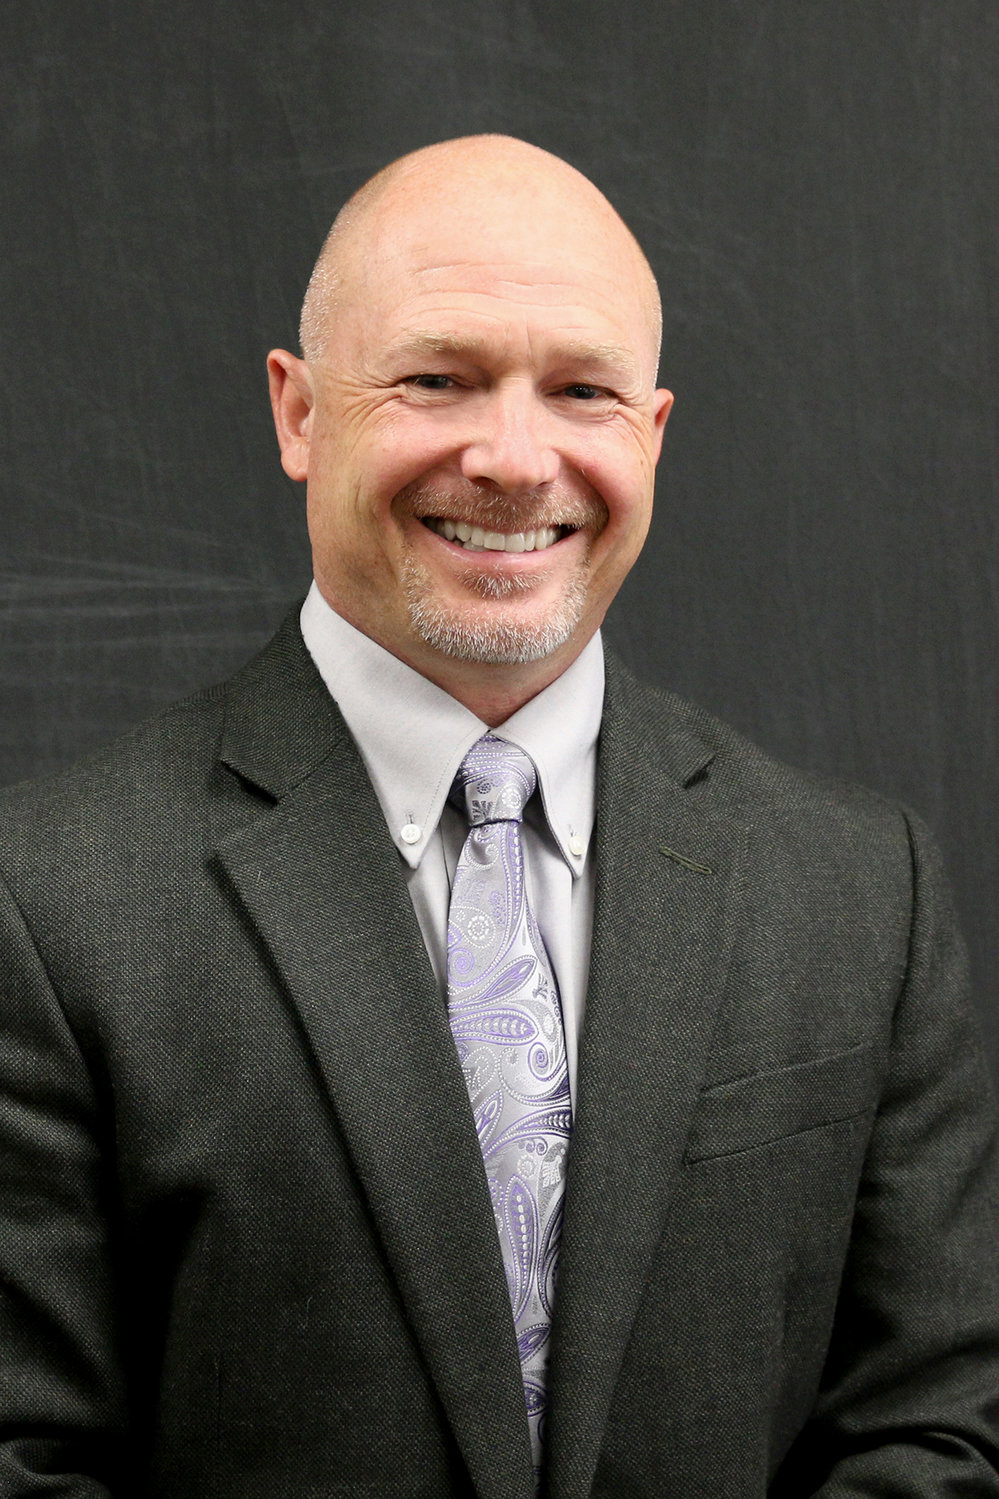 Chris Bauman is on pace to lead the district at least through the 2025-26 academic year.